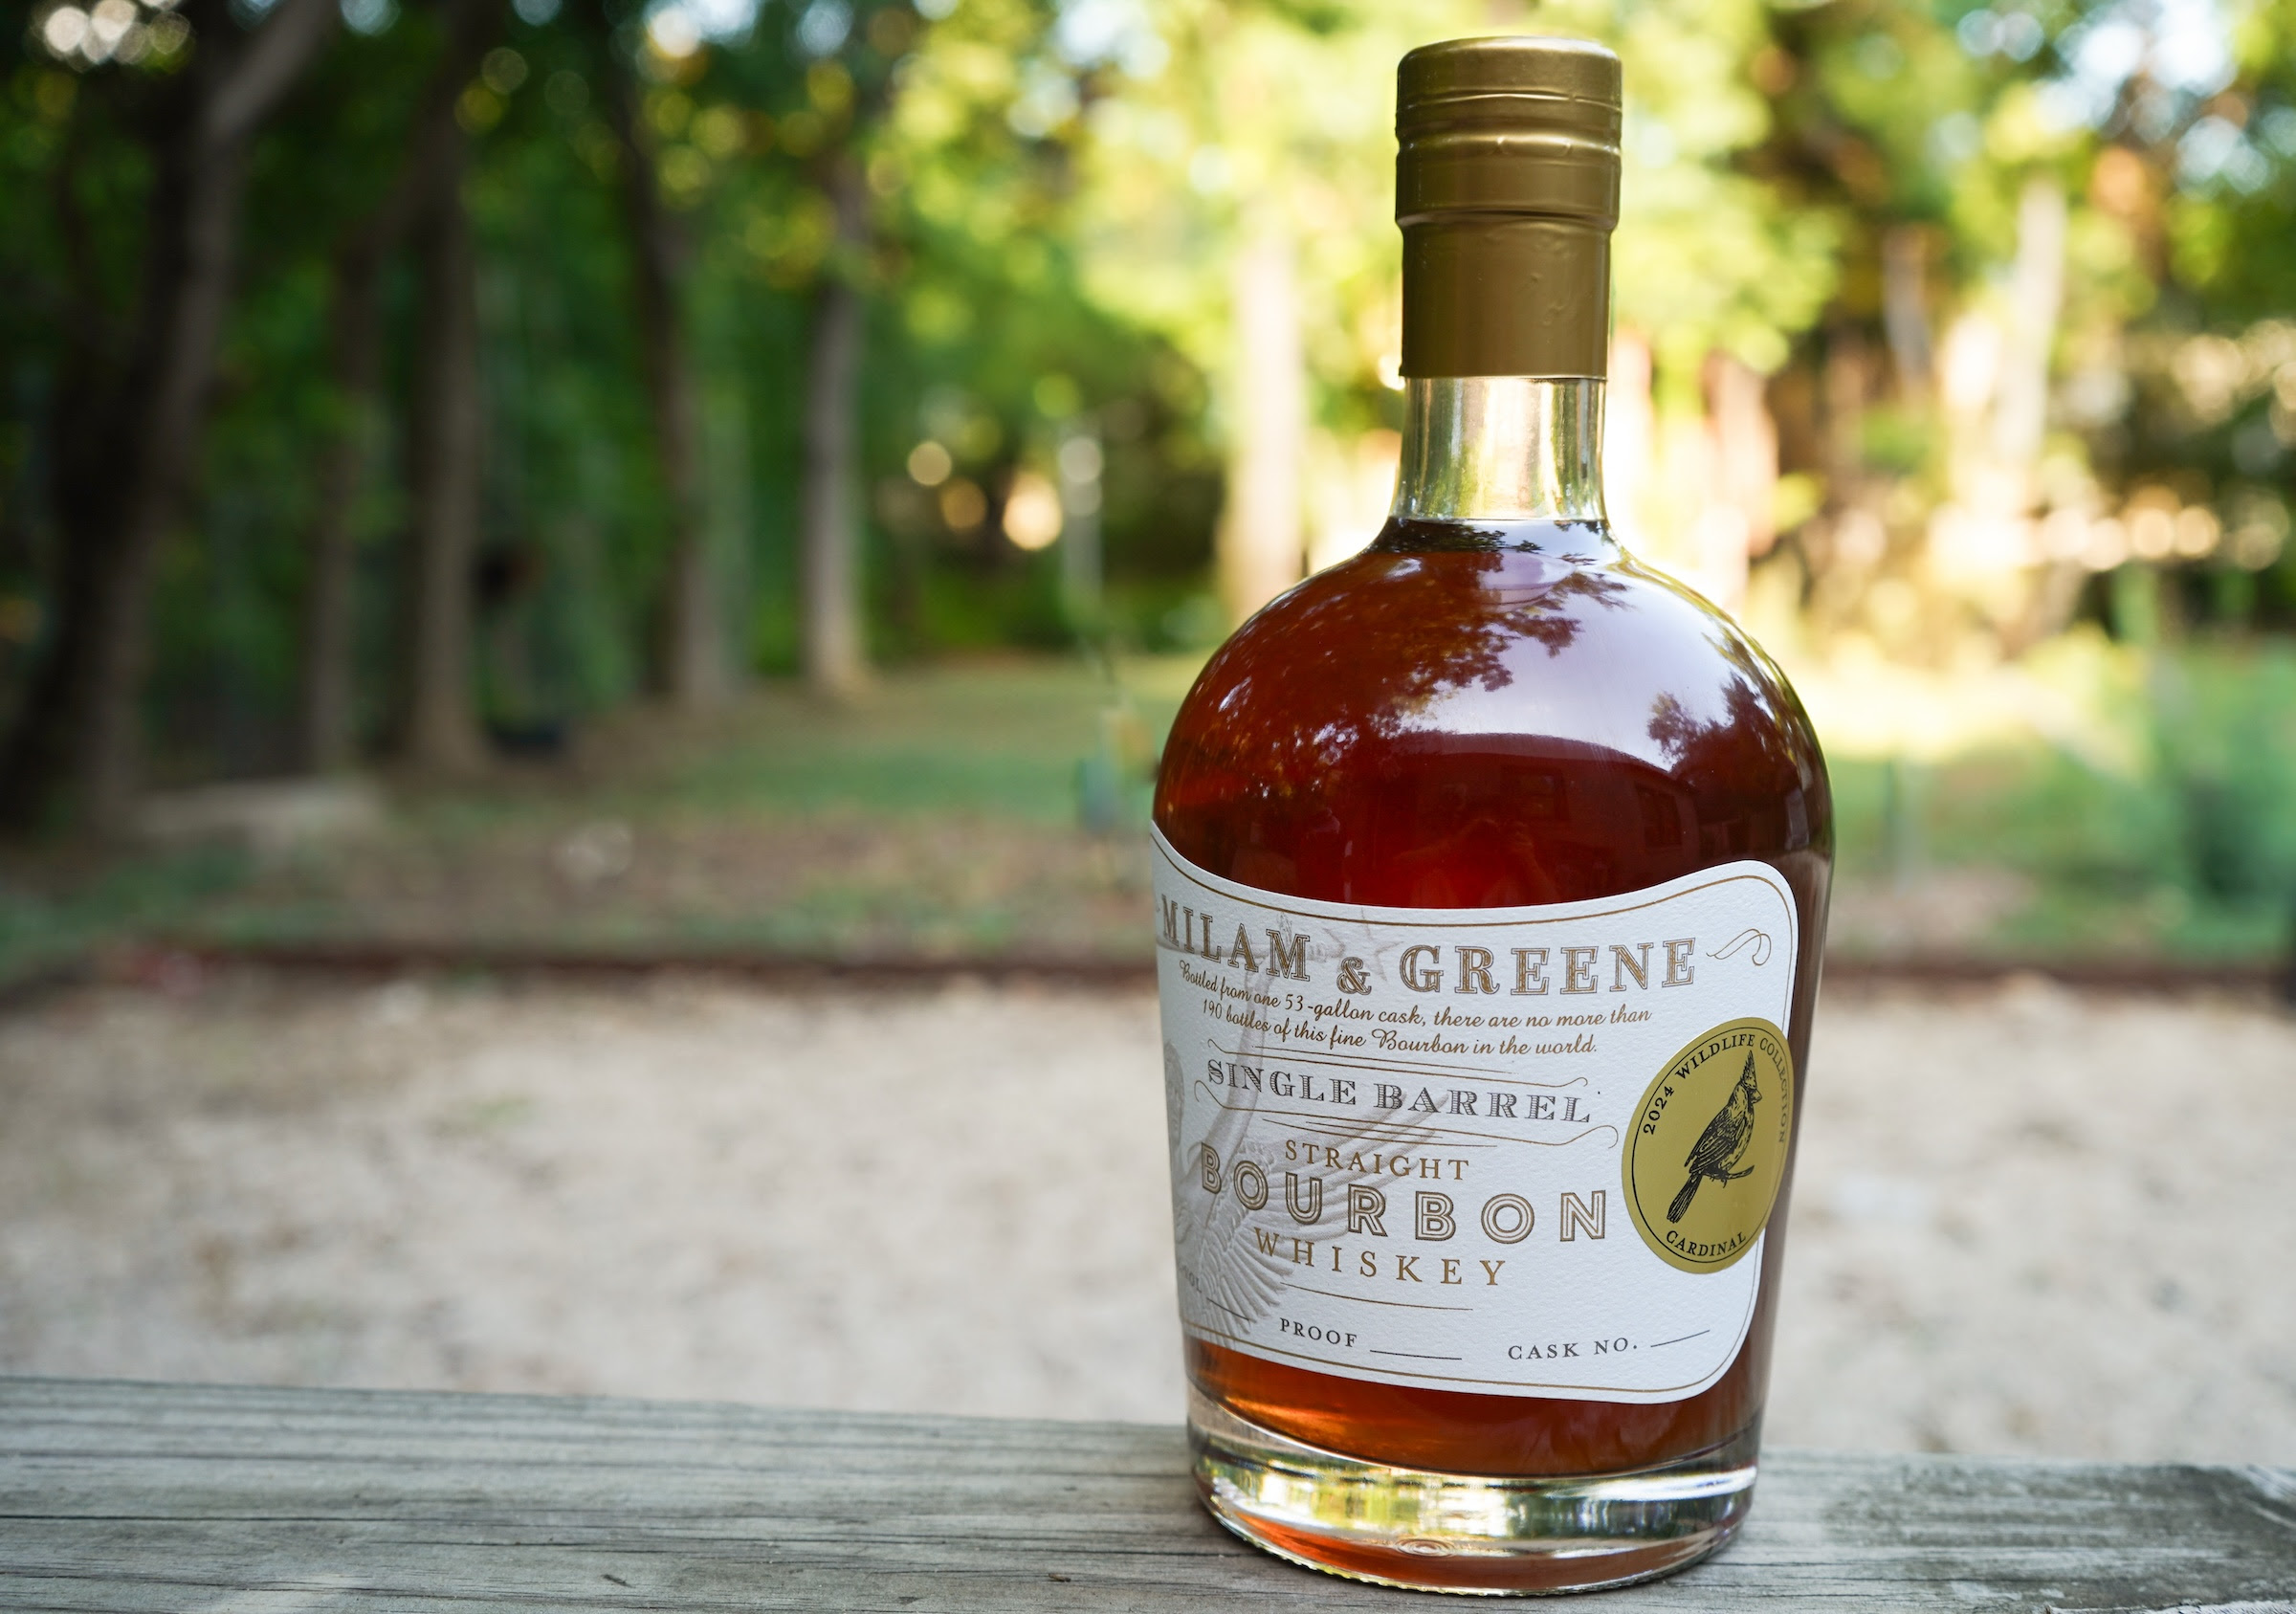 Milam & Greene Whiskey Cardinal Single Barrel Bourbon Texas Hill Country bourbon limited-edition cask-strength whiskey Texas Parks and Wildlife Foundation bourbon aging process Wildlife Collection bourbon bourbon tasting notes